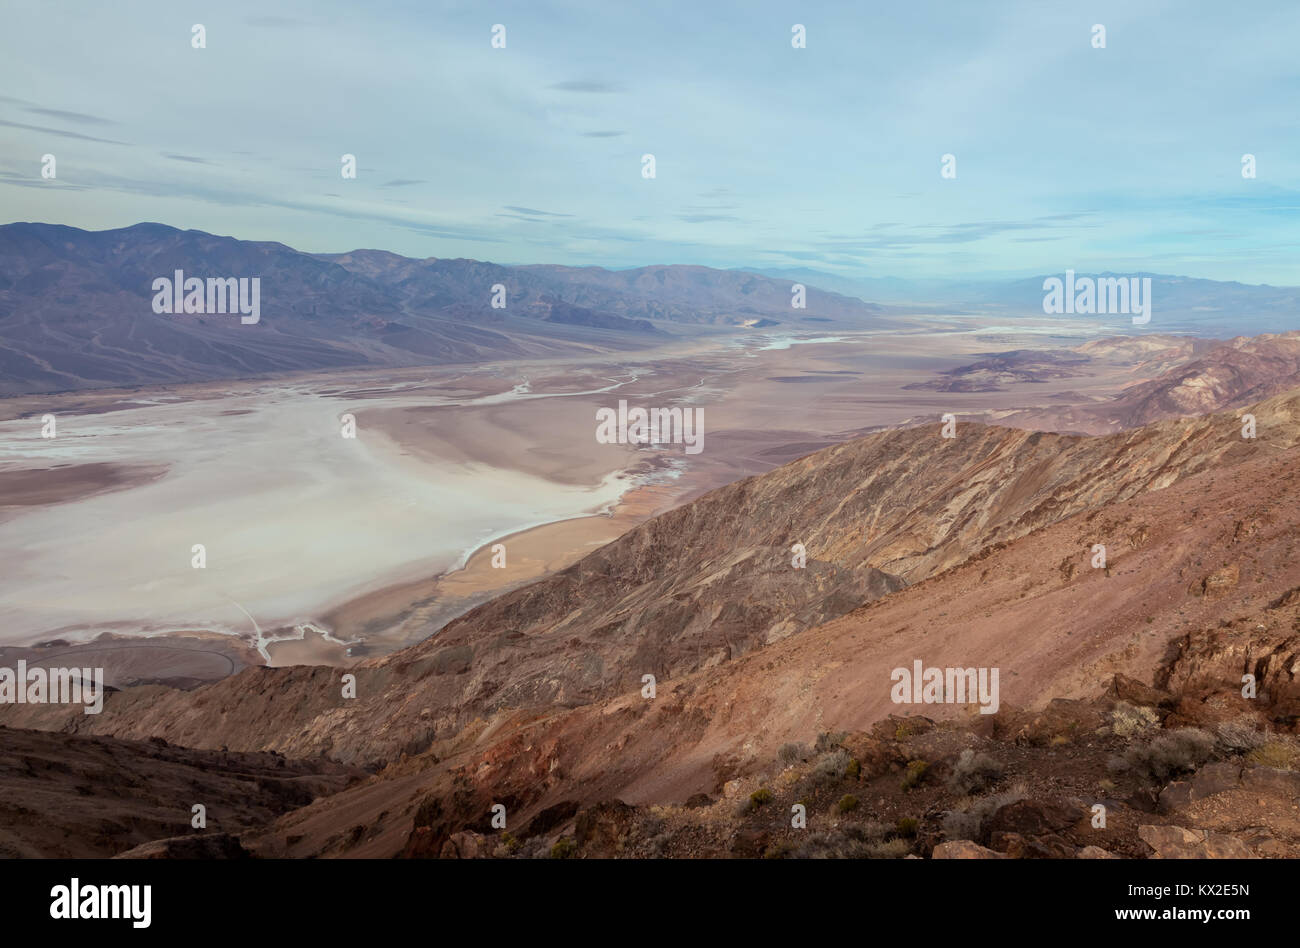 View of the Death Valley from the Dante's View, with the salt bed, Death Valley National Park, California, United States. Stock Photo